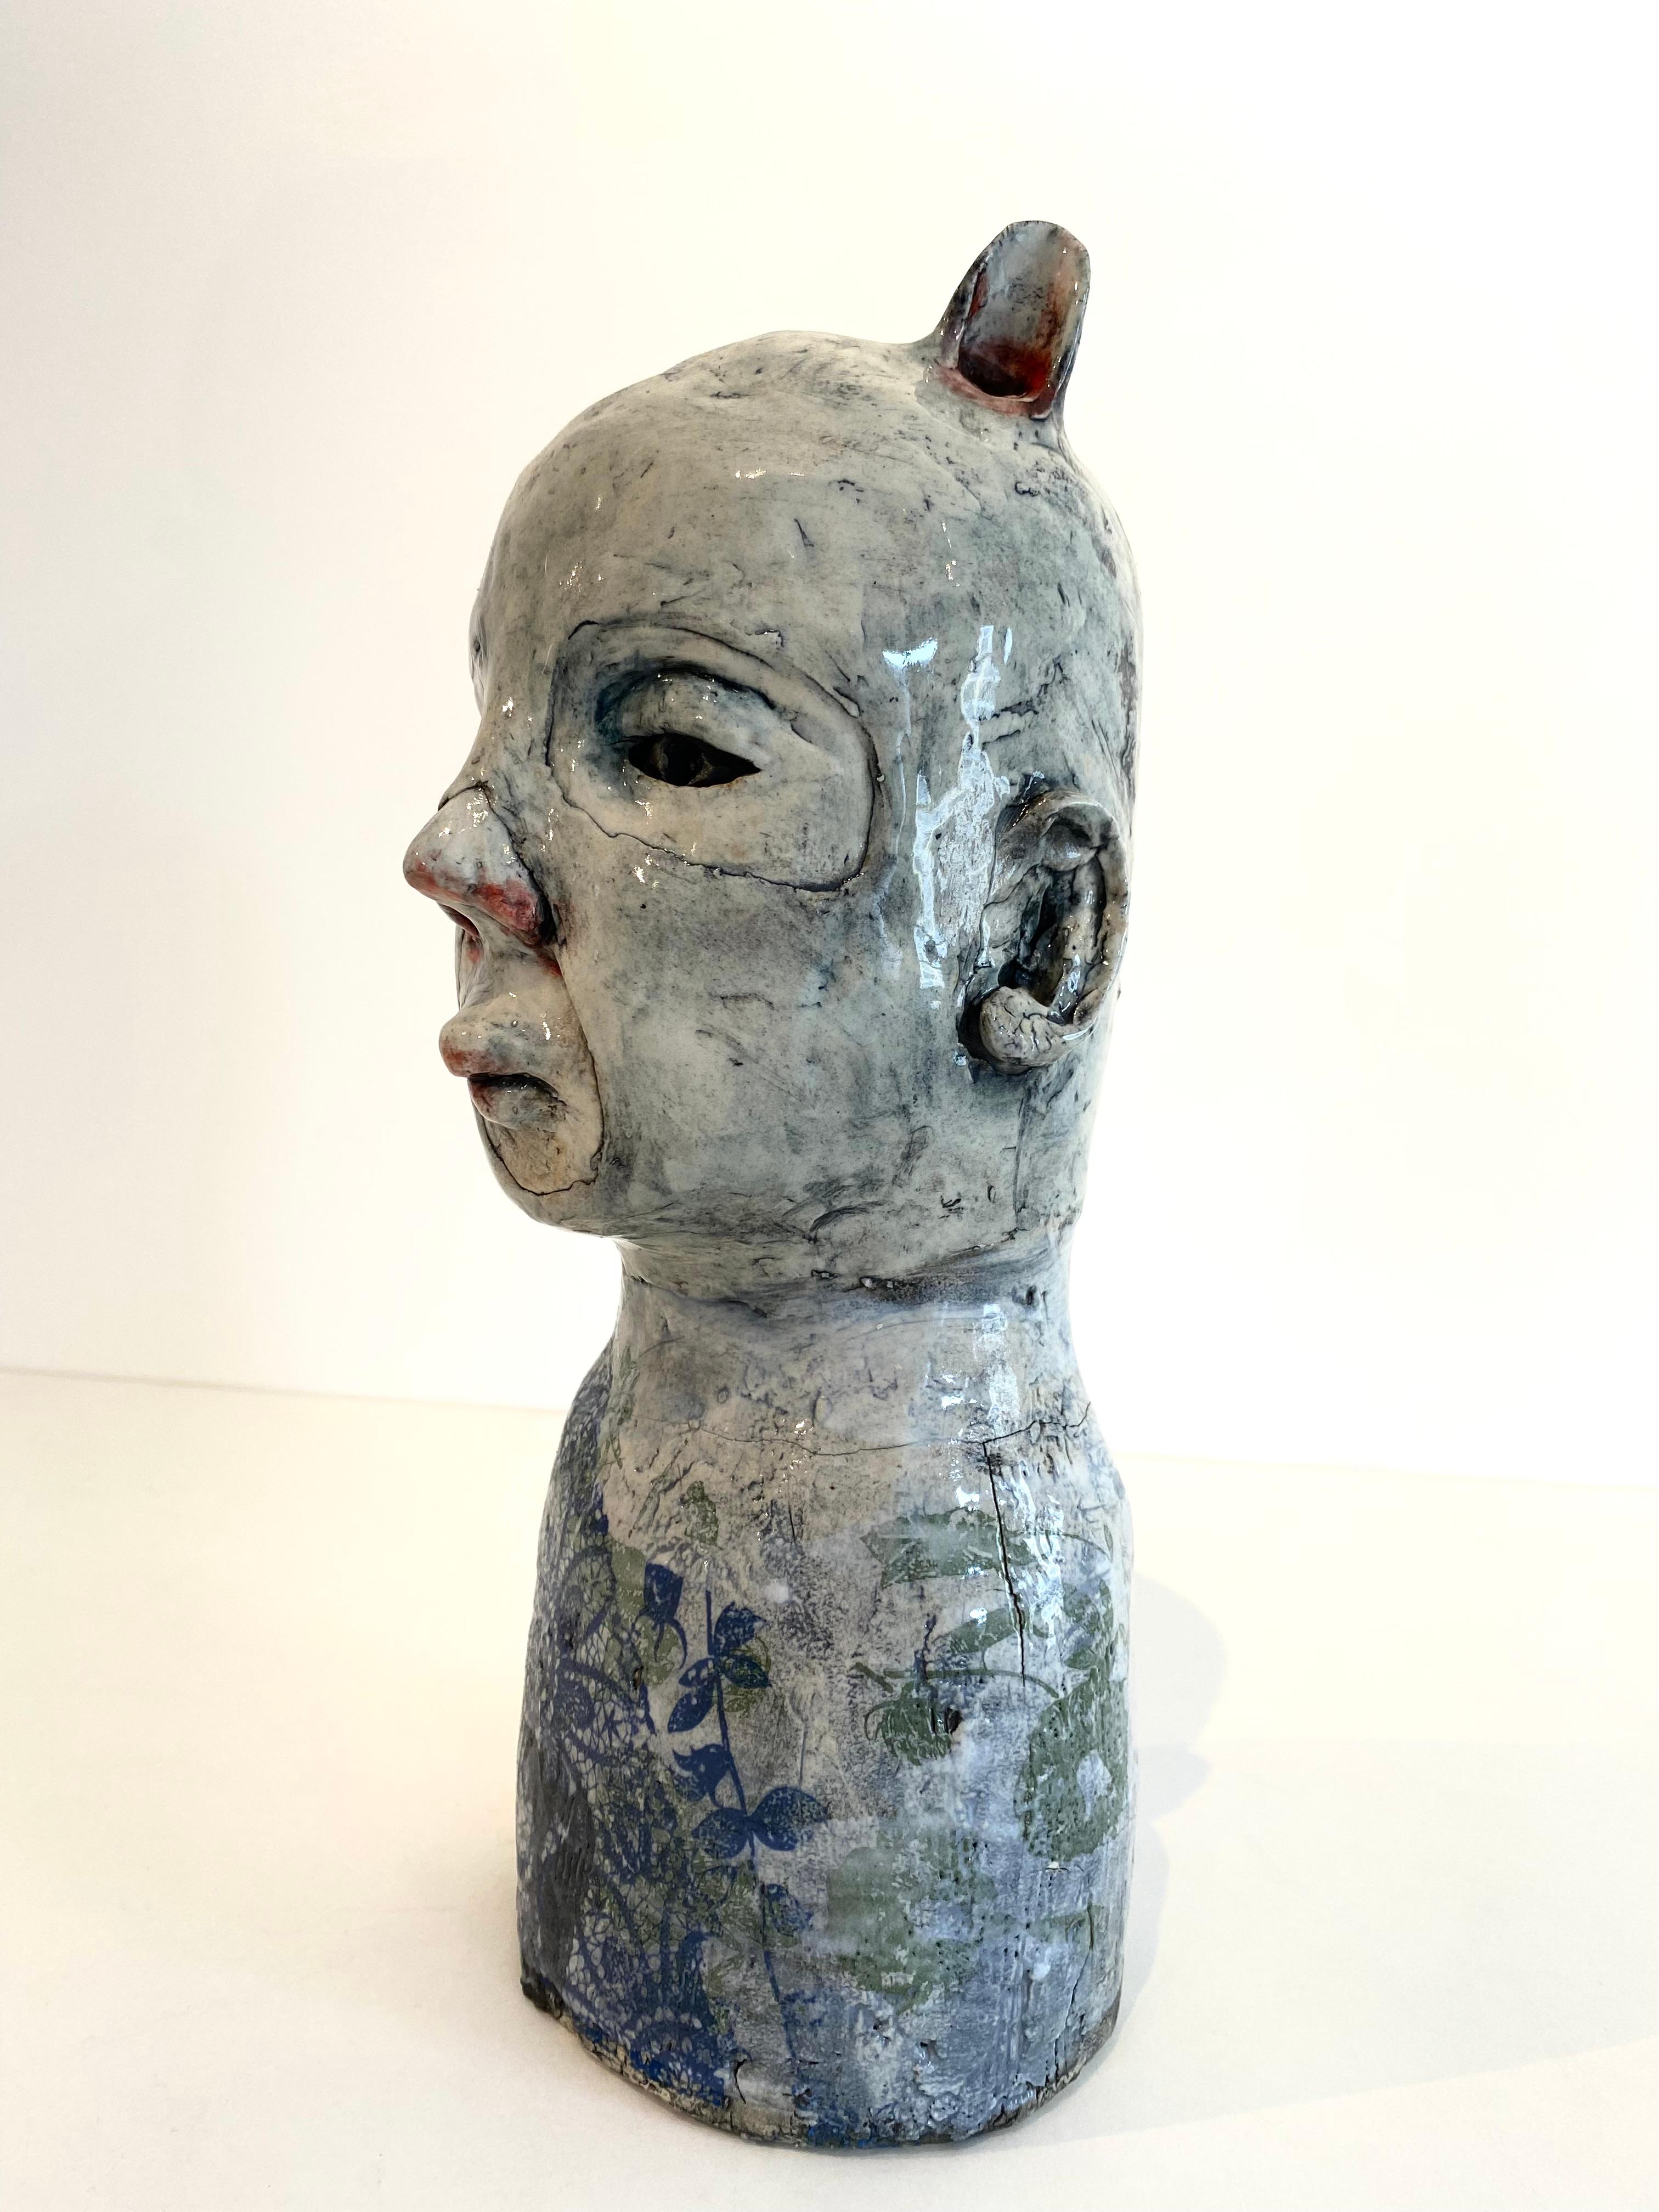 Ceramic Bunny Person: 'He wore it so no one would see him' - Sculpture by Ashley Benton